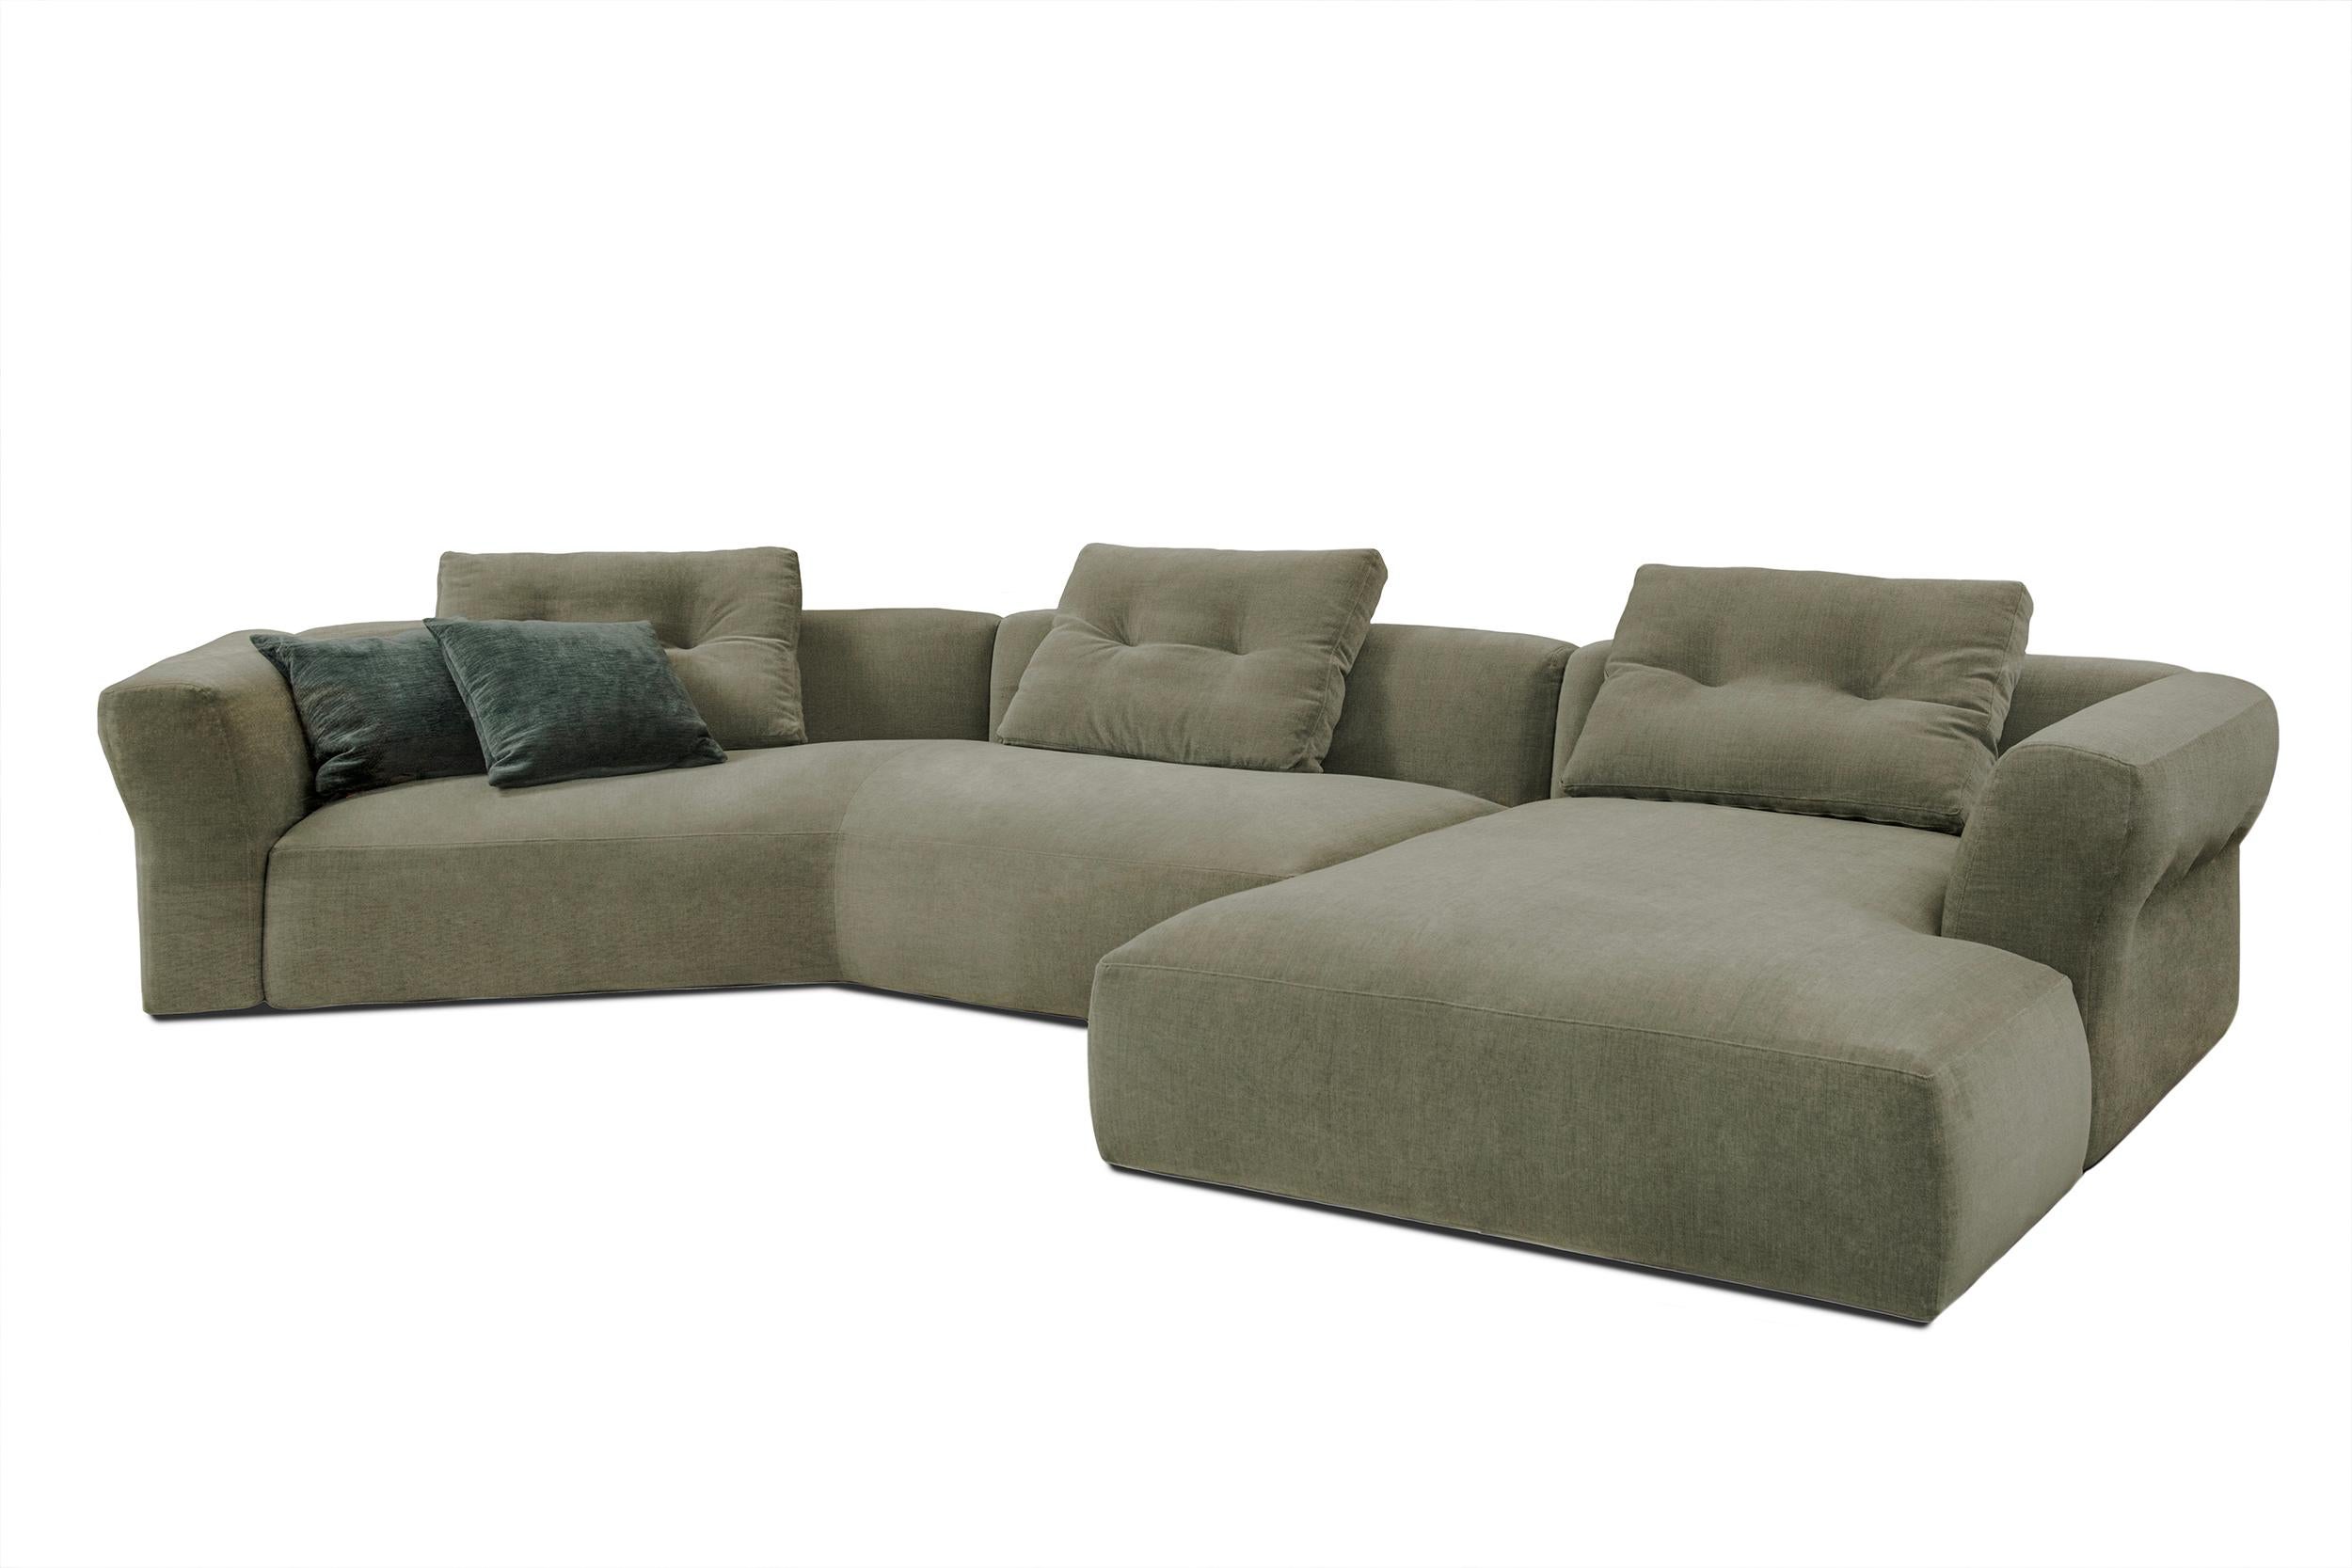 The Sengu Bold Sectional in sage green, is a modular sofa designed by Patricia Urquiola for Cassina. Its open, generous shapes encourage conviviality, in an even more comfortable version, with soft lines and extra star-worthy padding. This new